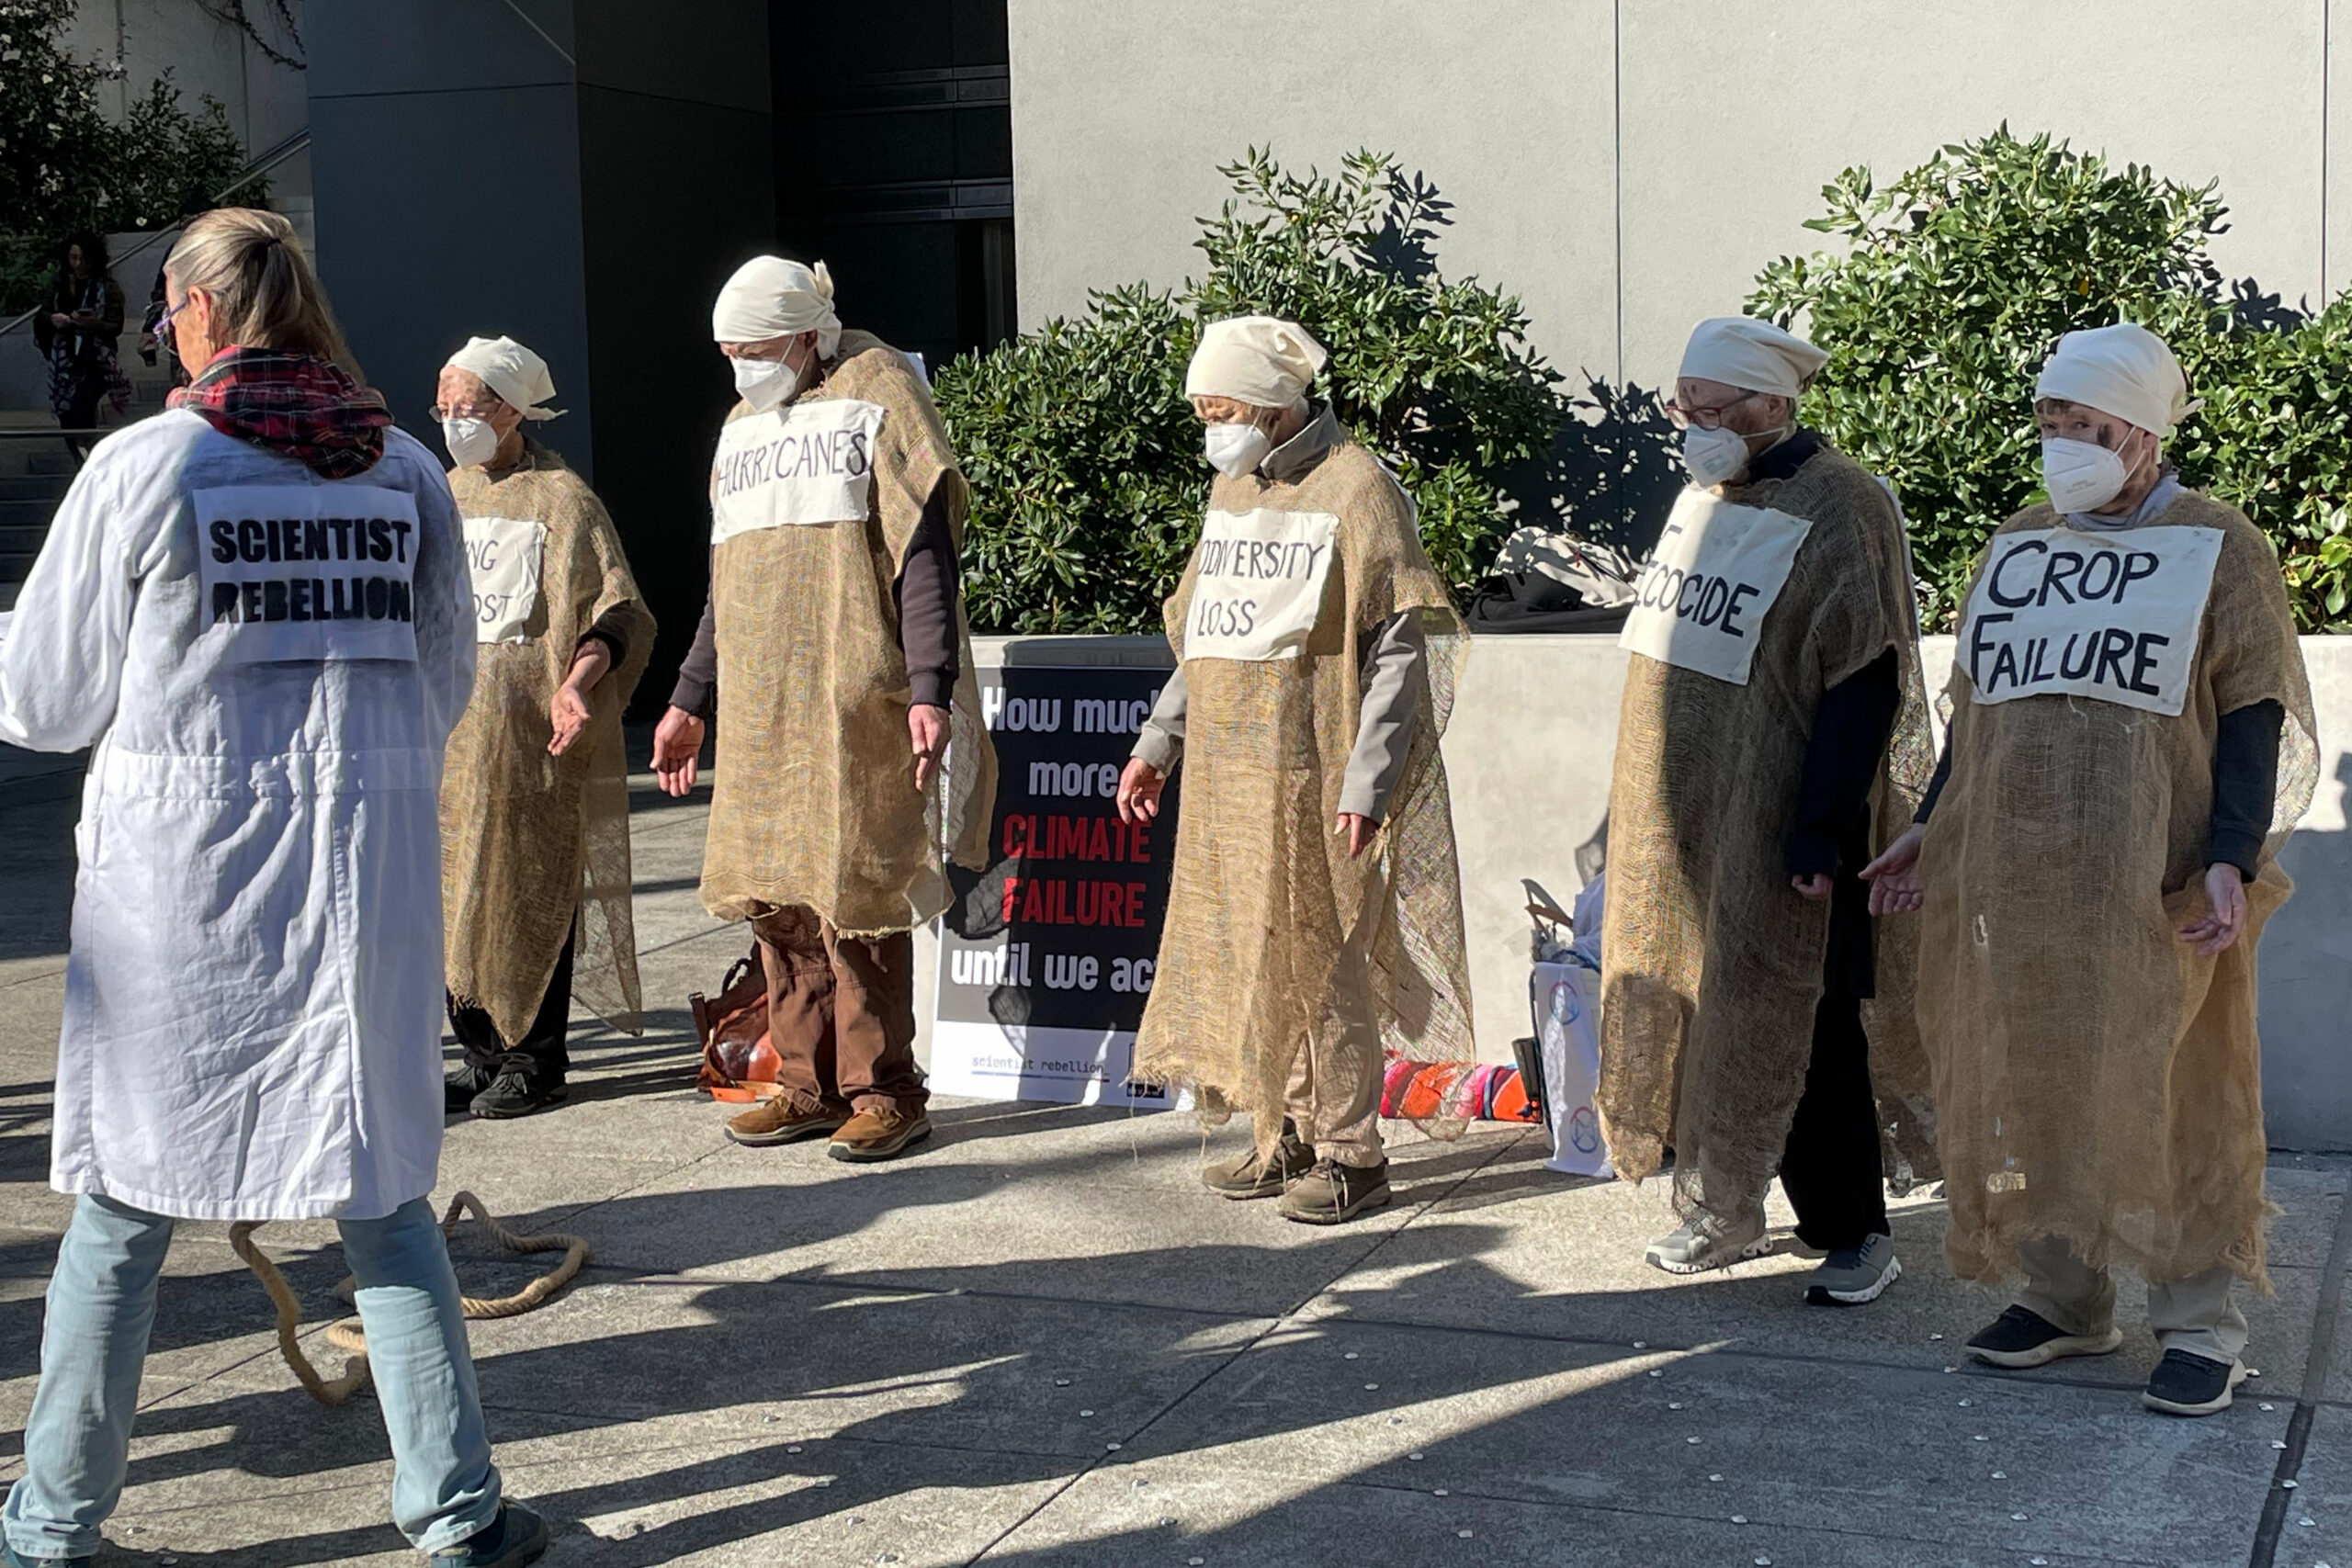 Scientist Rebellion, Extinction Rebellion and other scientist-activist groups staged a play dramatizing the threats fossil fuel development pose to the planet at the American Geophysical Union annual meeting in San Francisco. Credit: Liza Gross/Inside Climate News